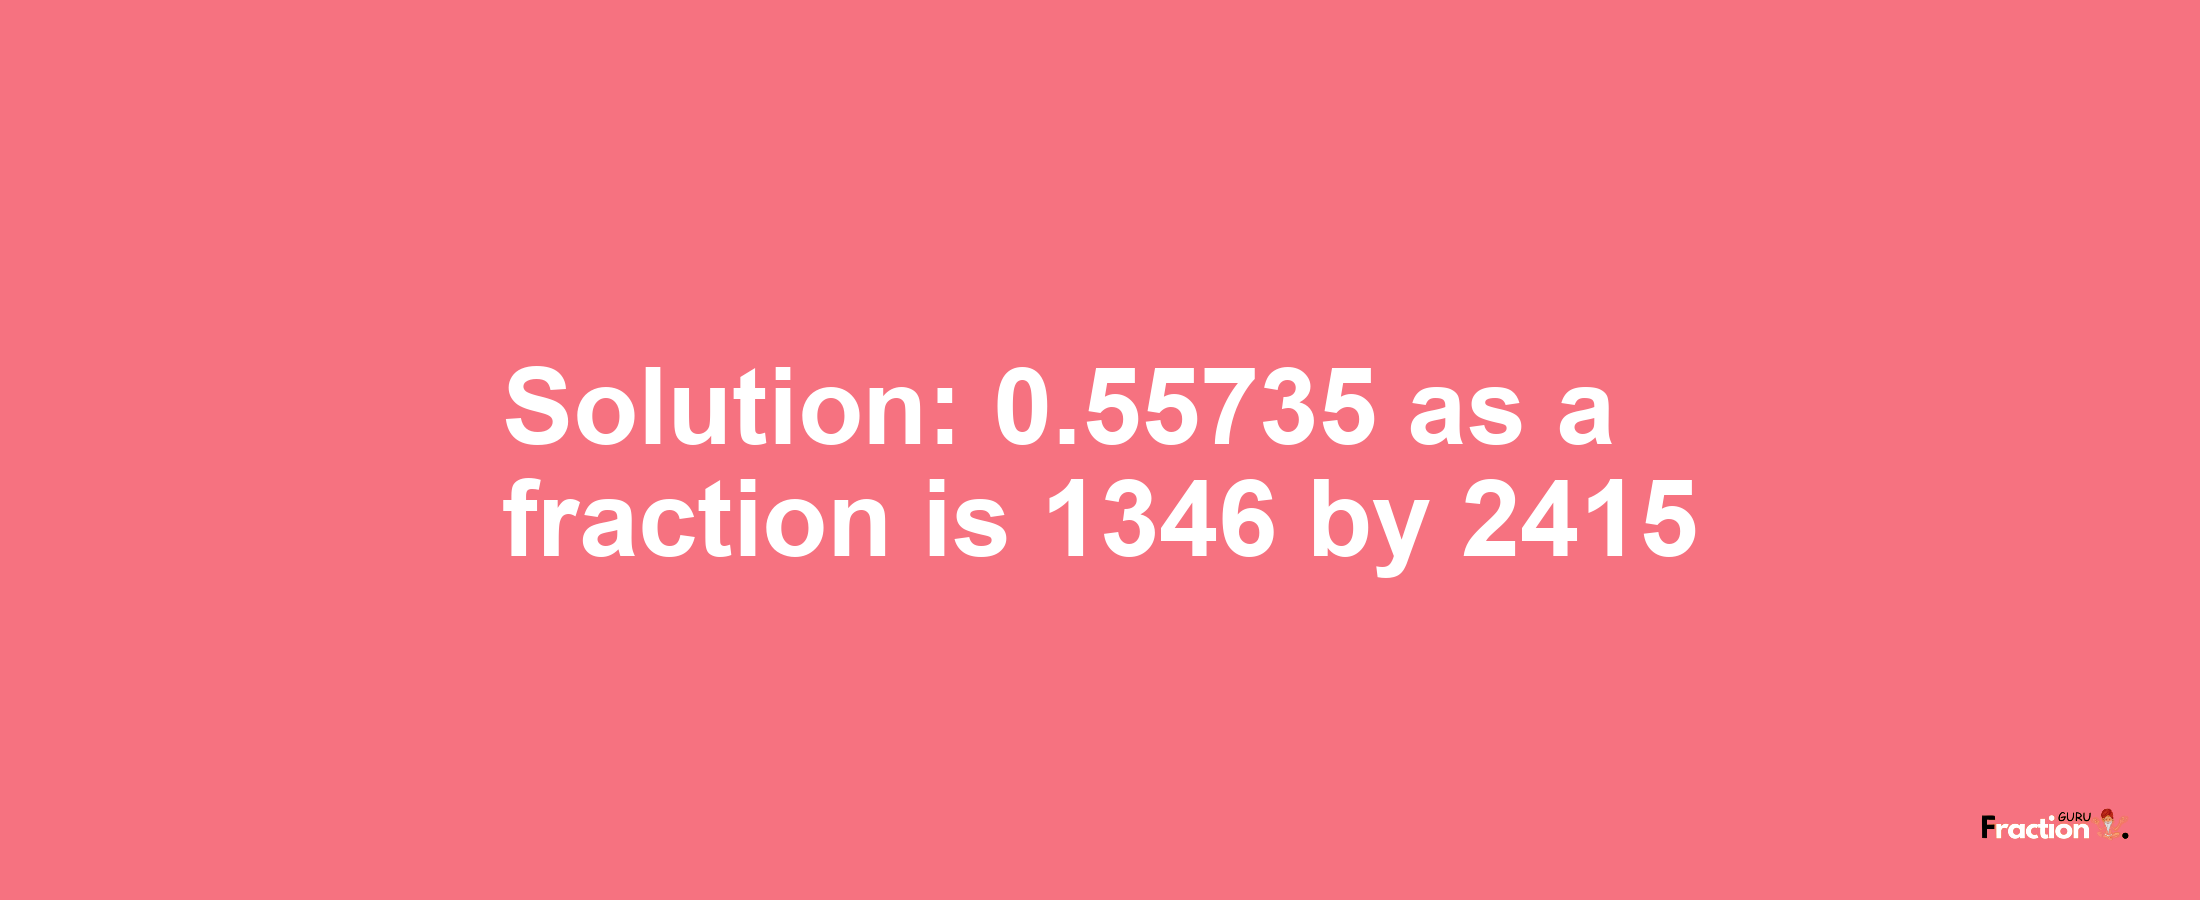 Solution:0.55735 as a fraction is 1346/2415